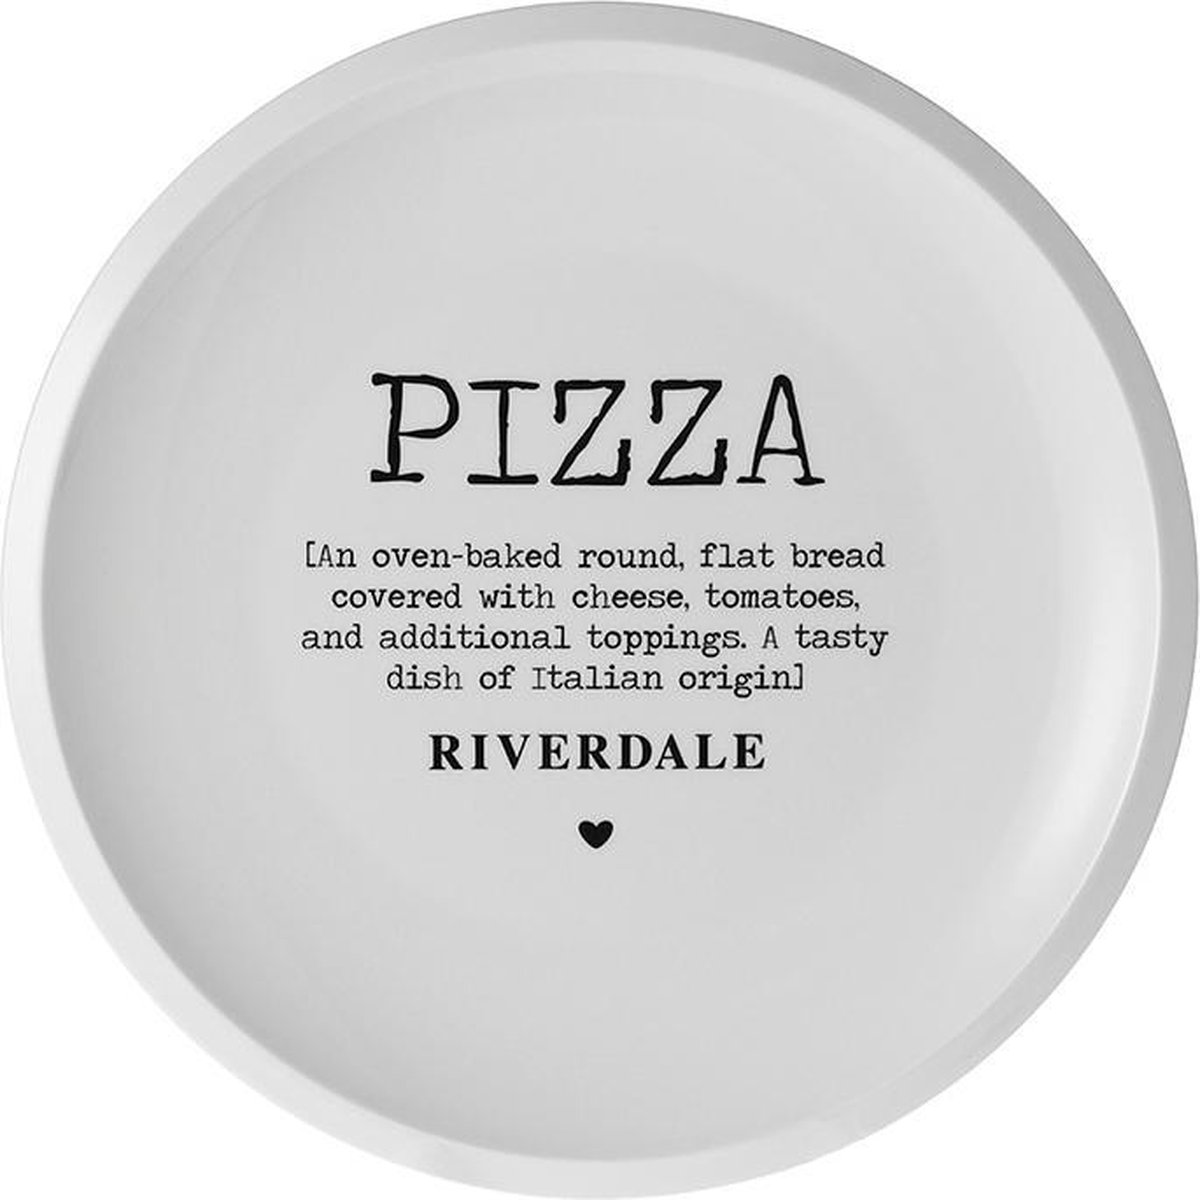 Woedend pen oosters Riverdale - Pizzabord - Love - Wit - 32 cm AB | bol.com